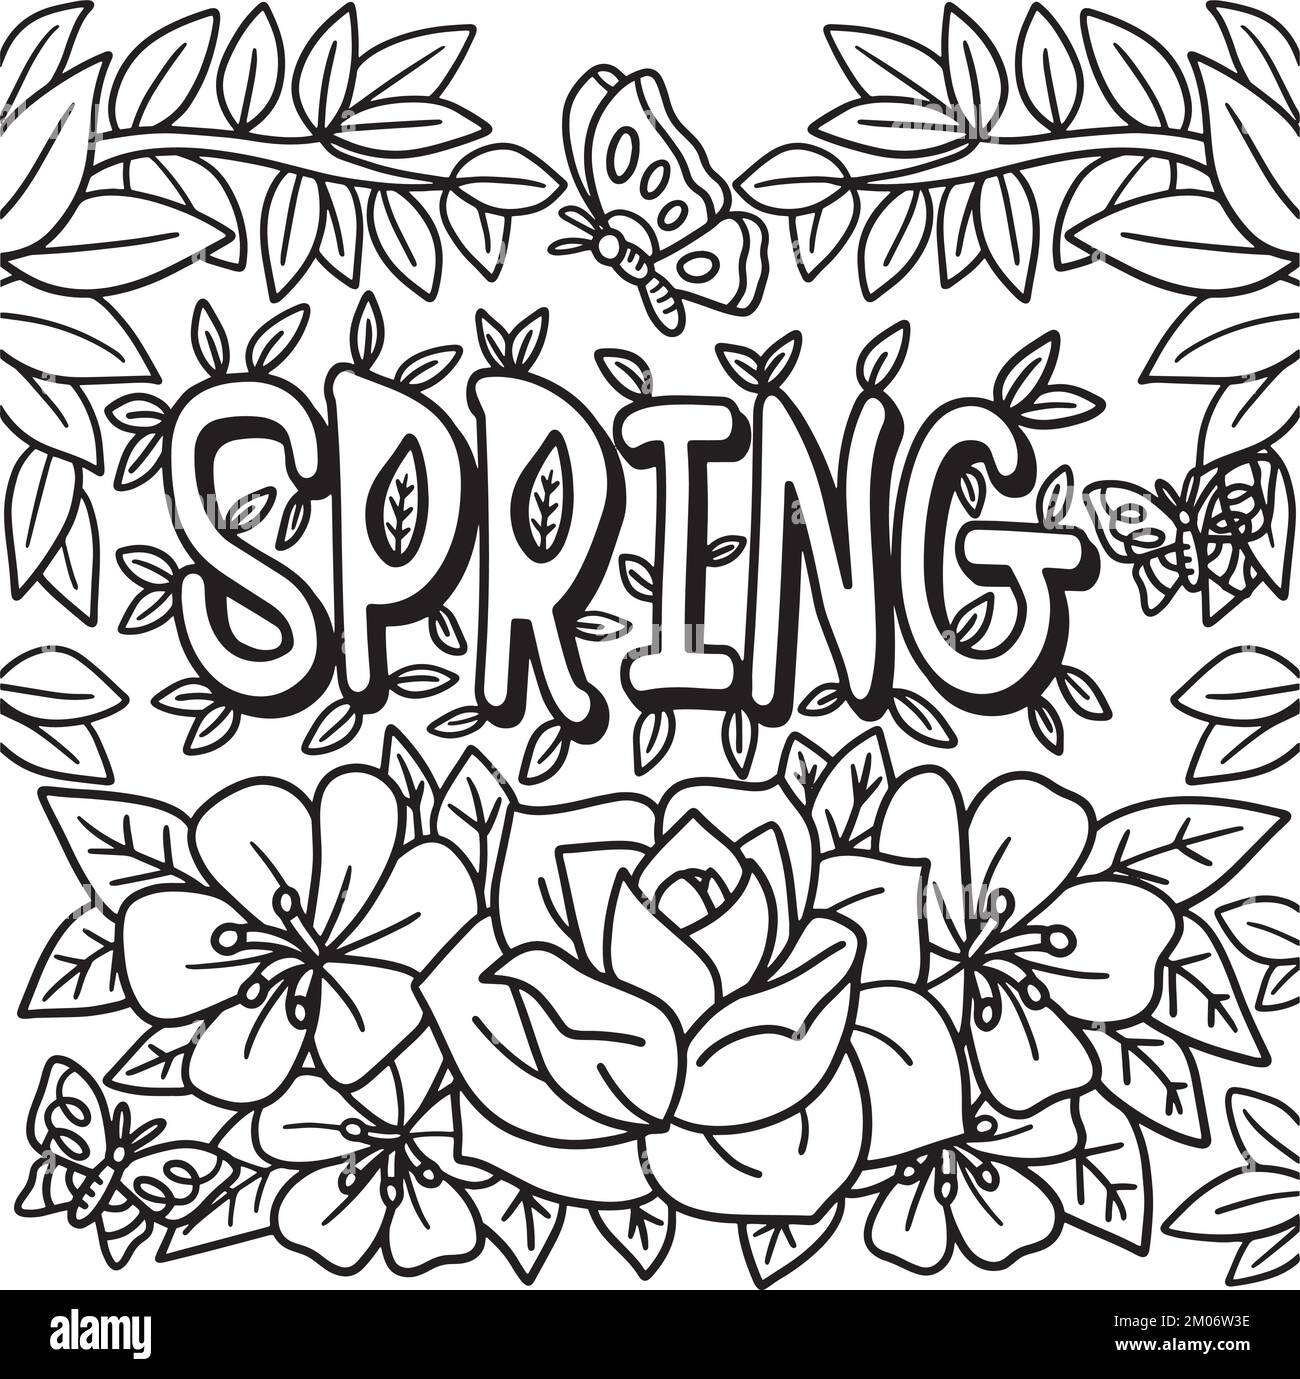 Spring Butterfly Flower Coloring Page for Kids Stock Vector Image & Art ...